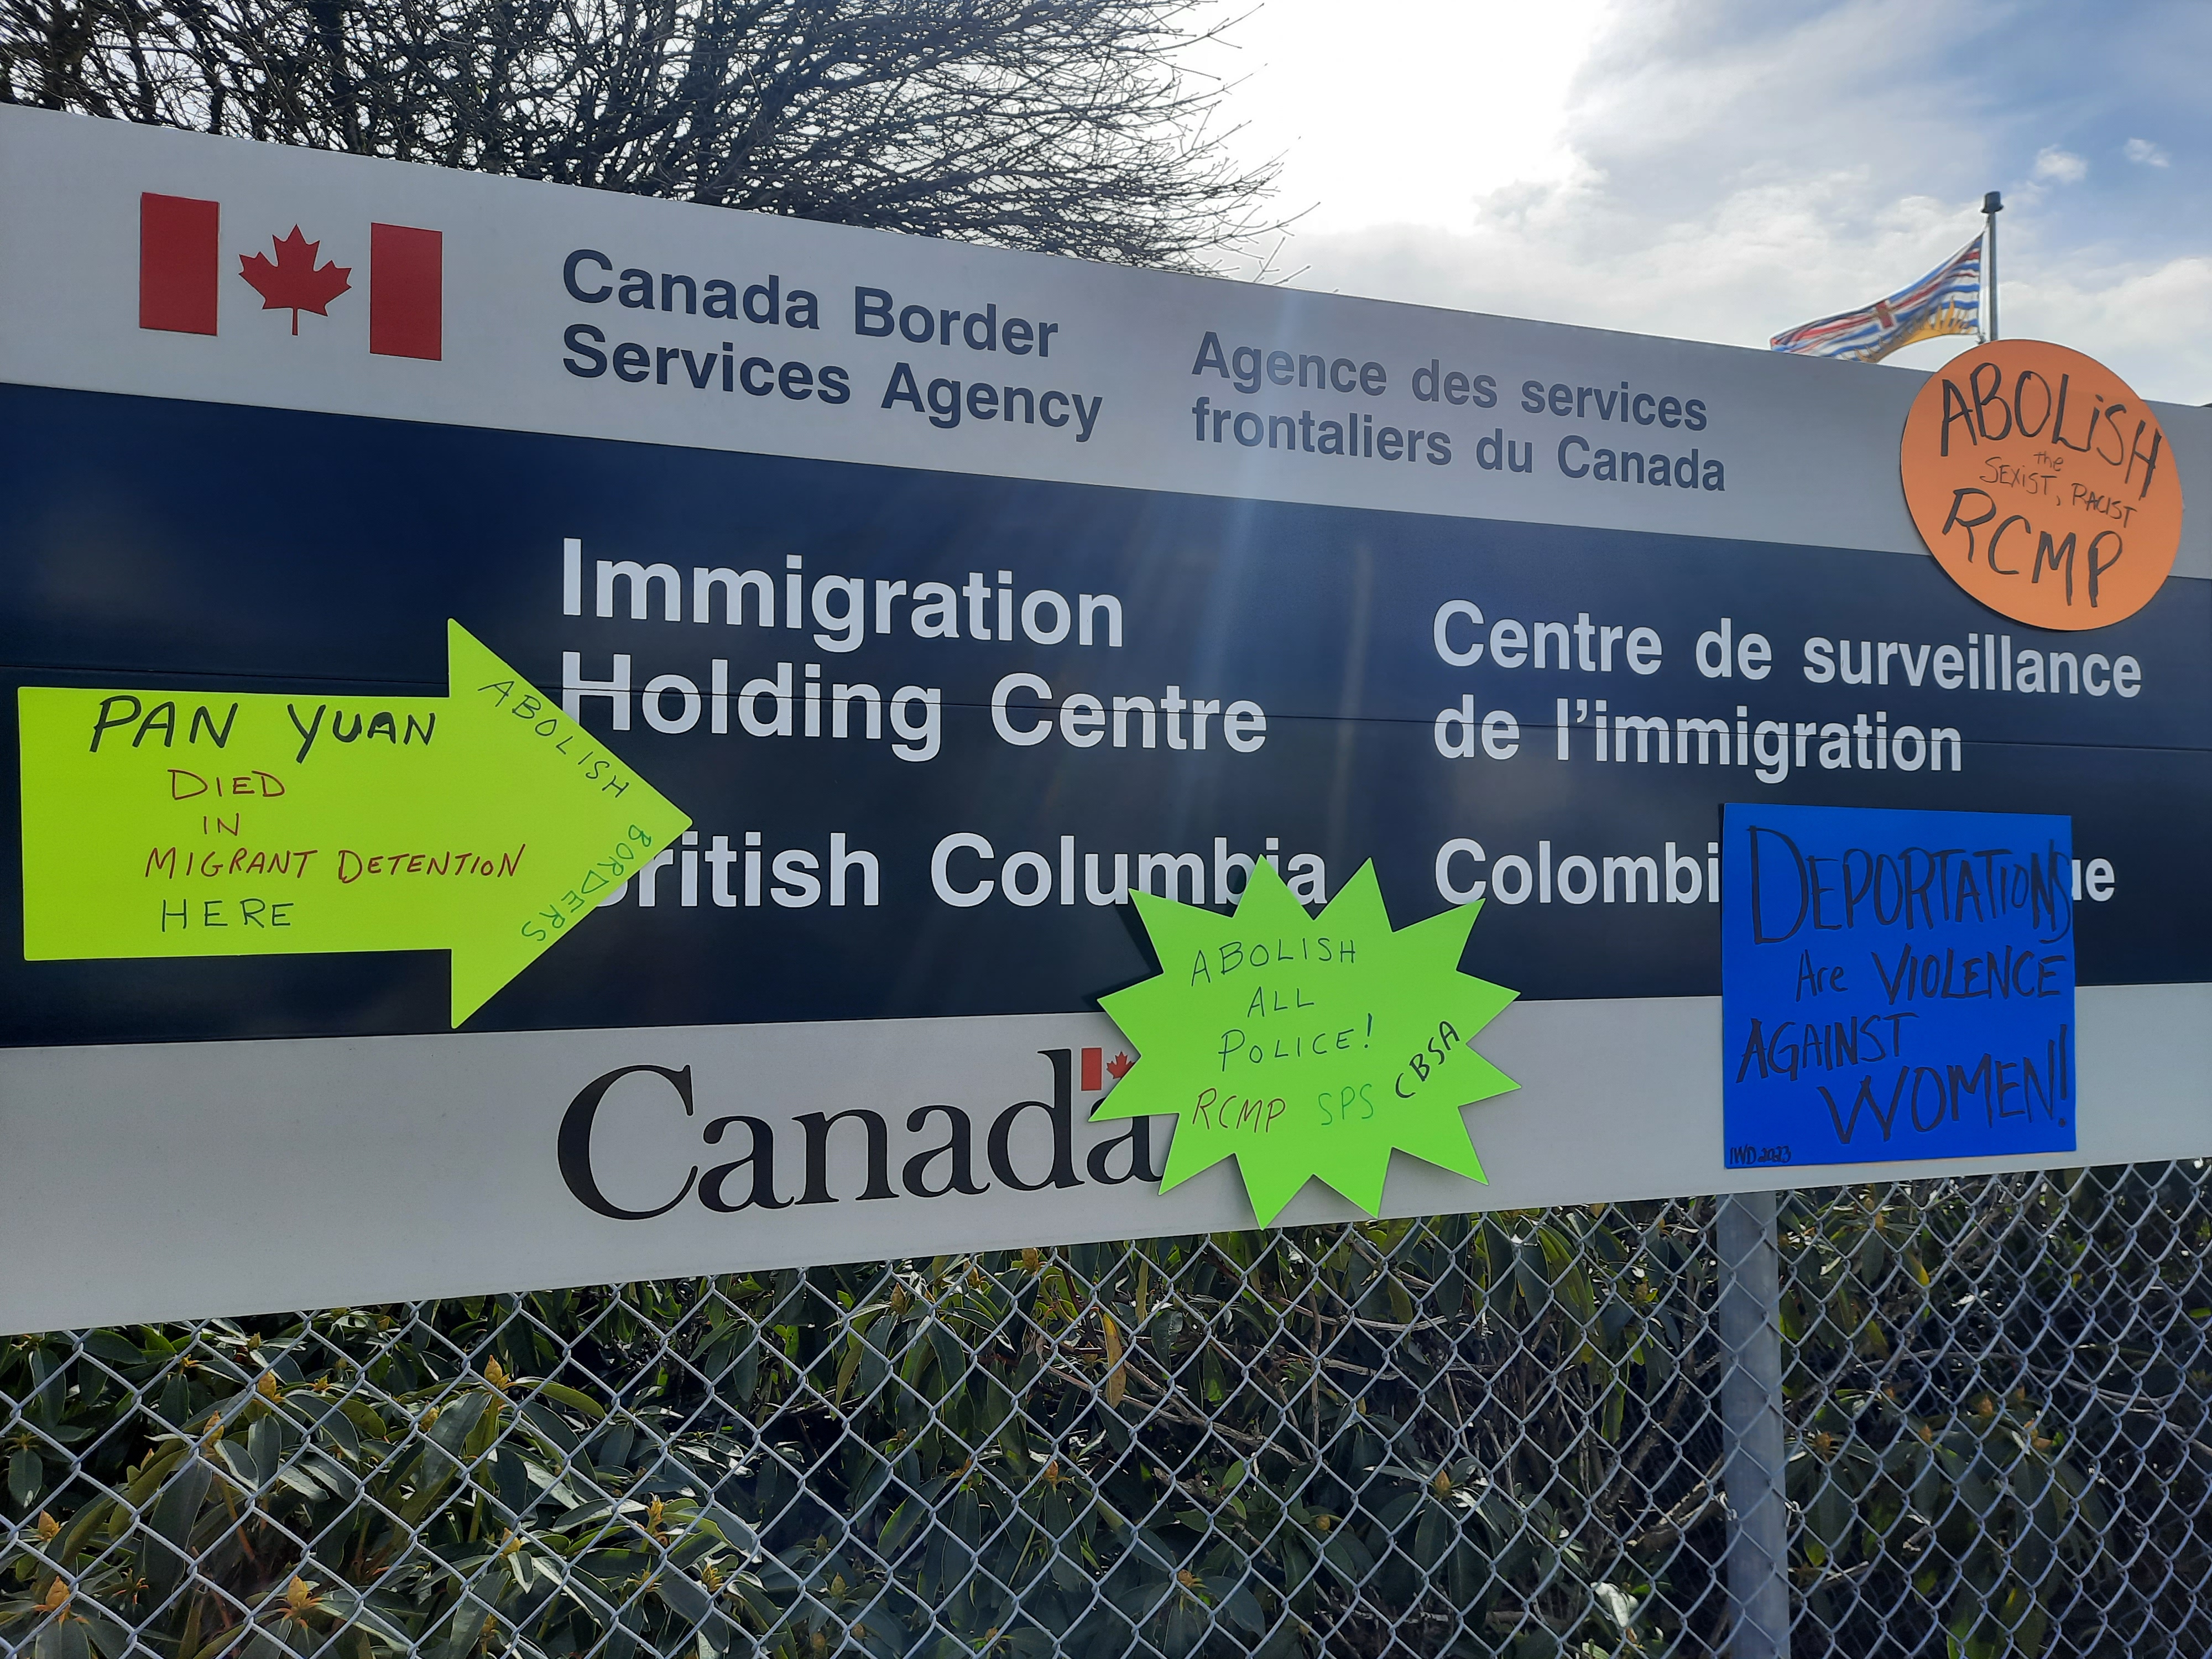 a sign towards an immigration holding centre covered with notes about abolition 